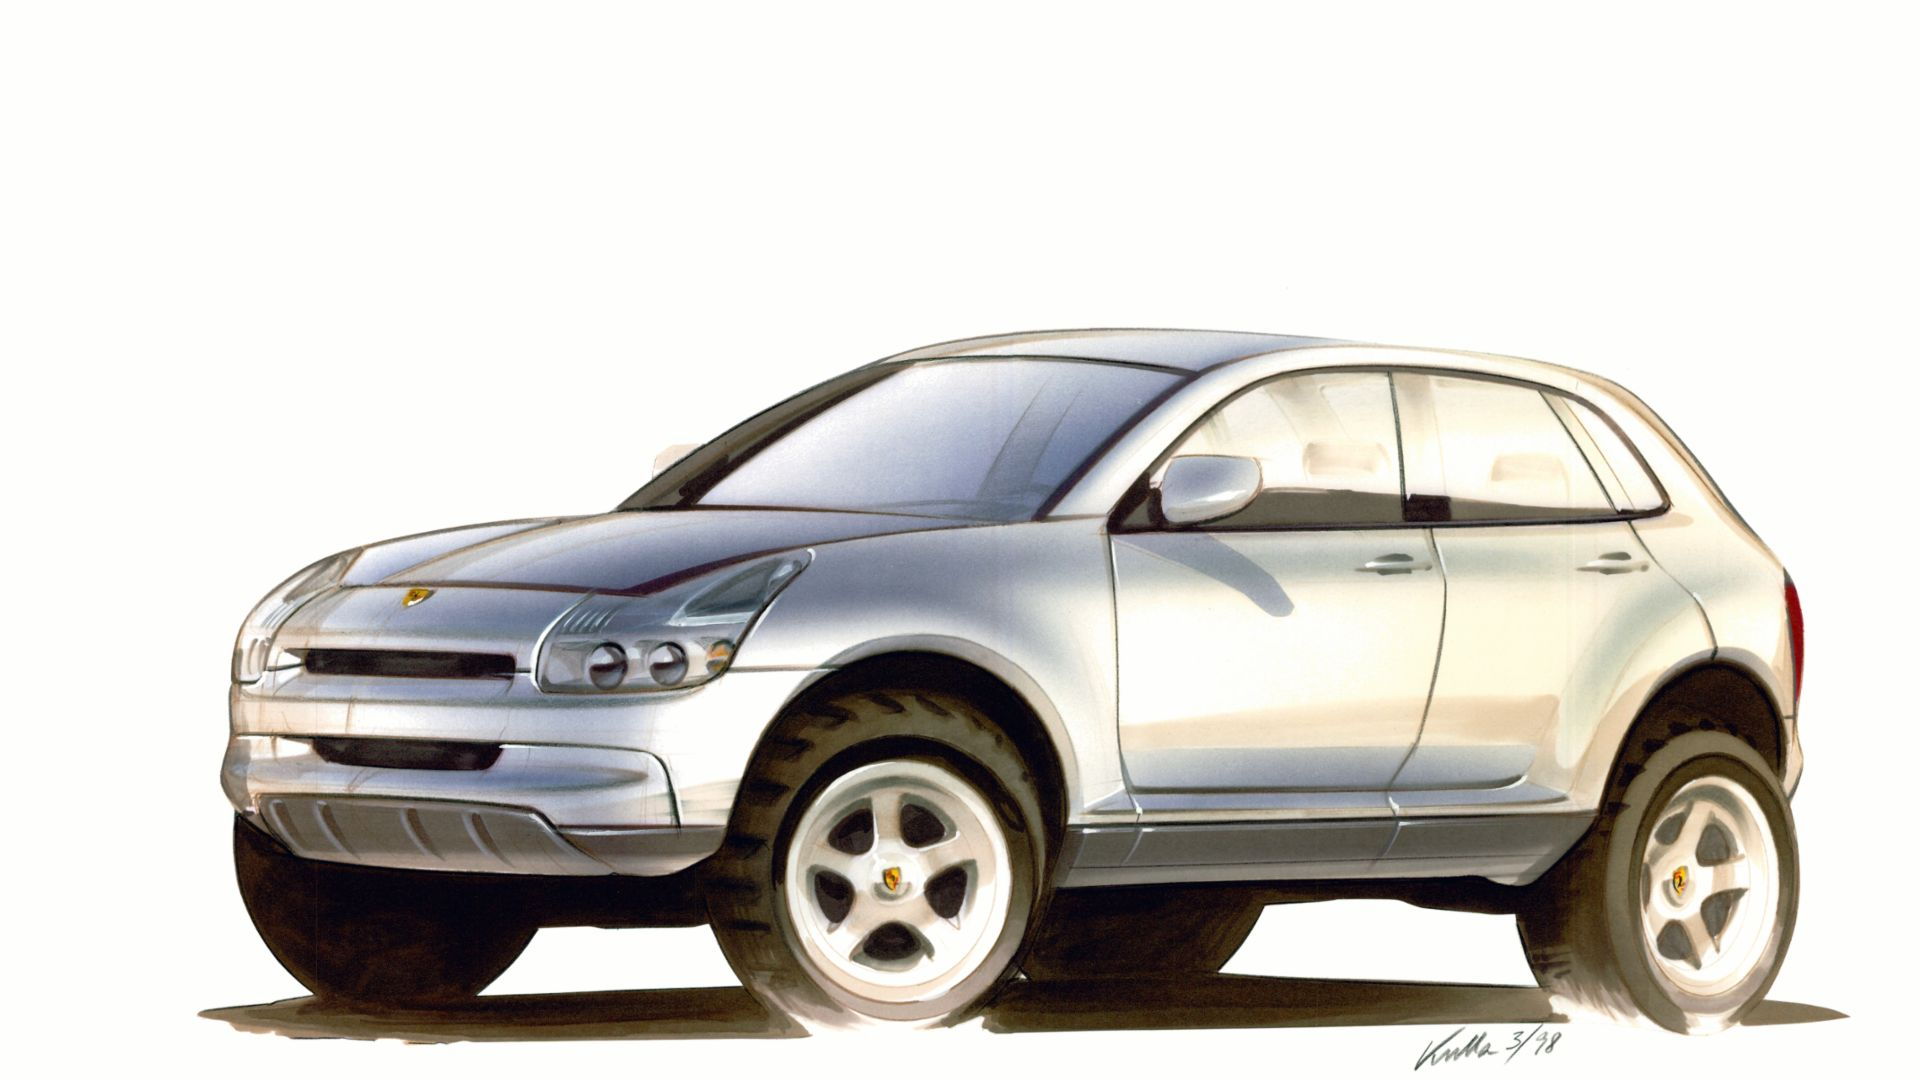 Early design sketch for the first-generation Porsche Cayenne